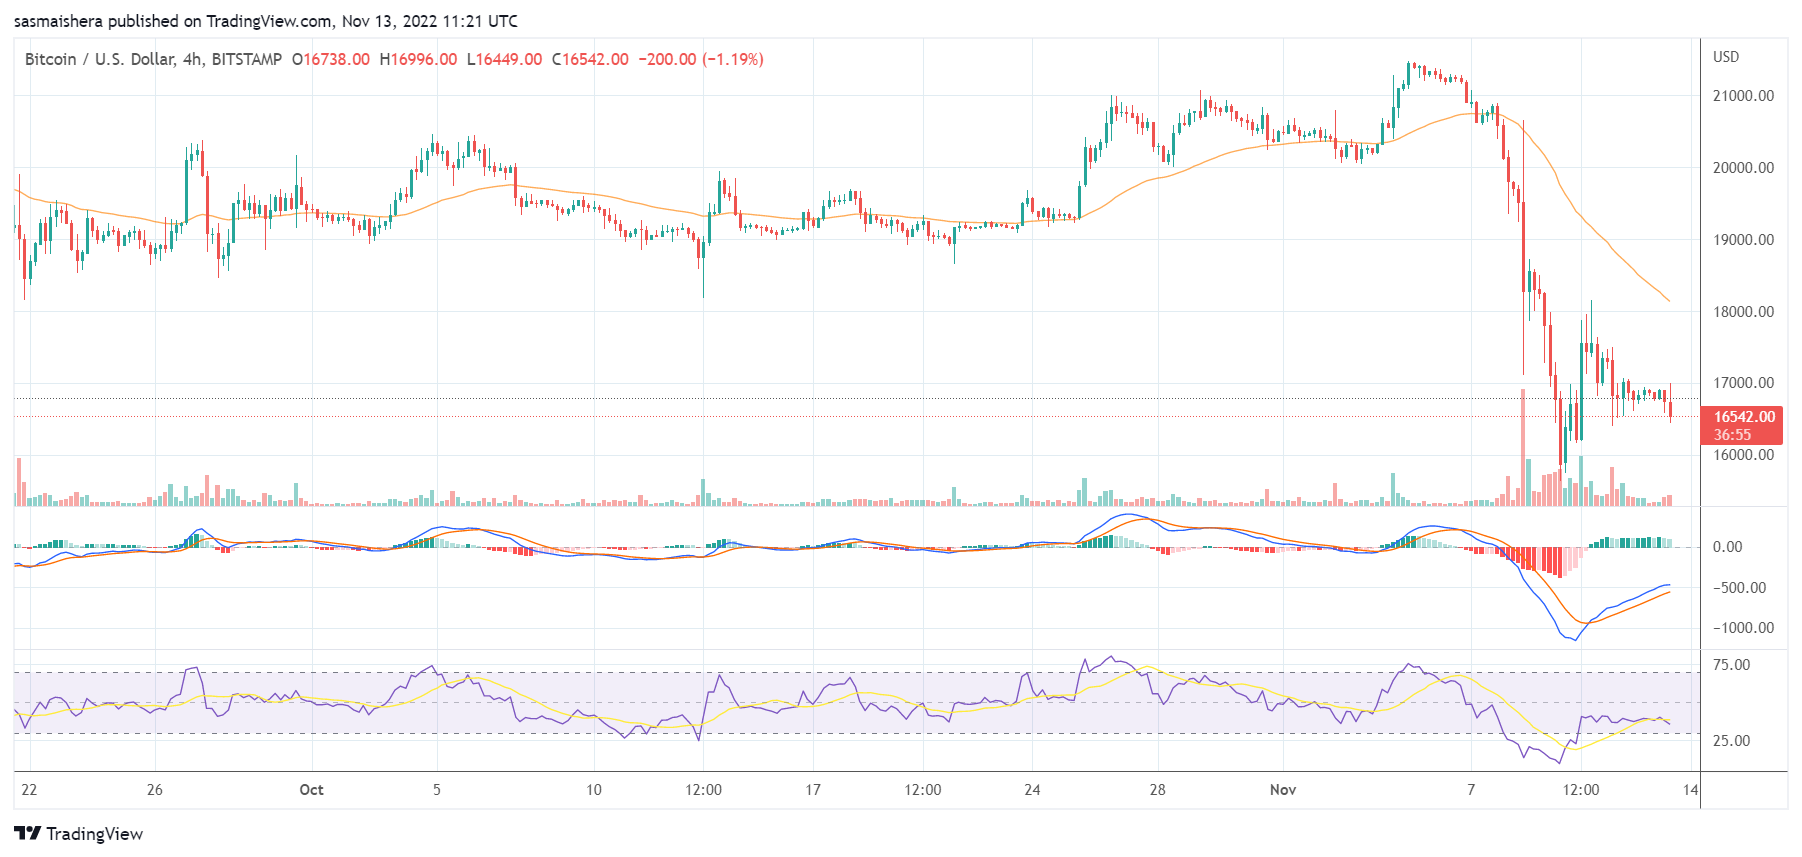 Bitcoin maintains its price above $16k but could dip lower soon